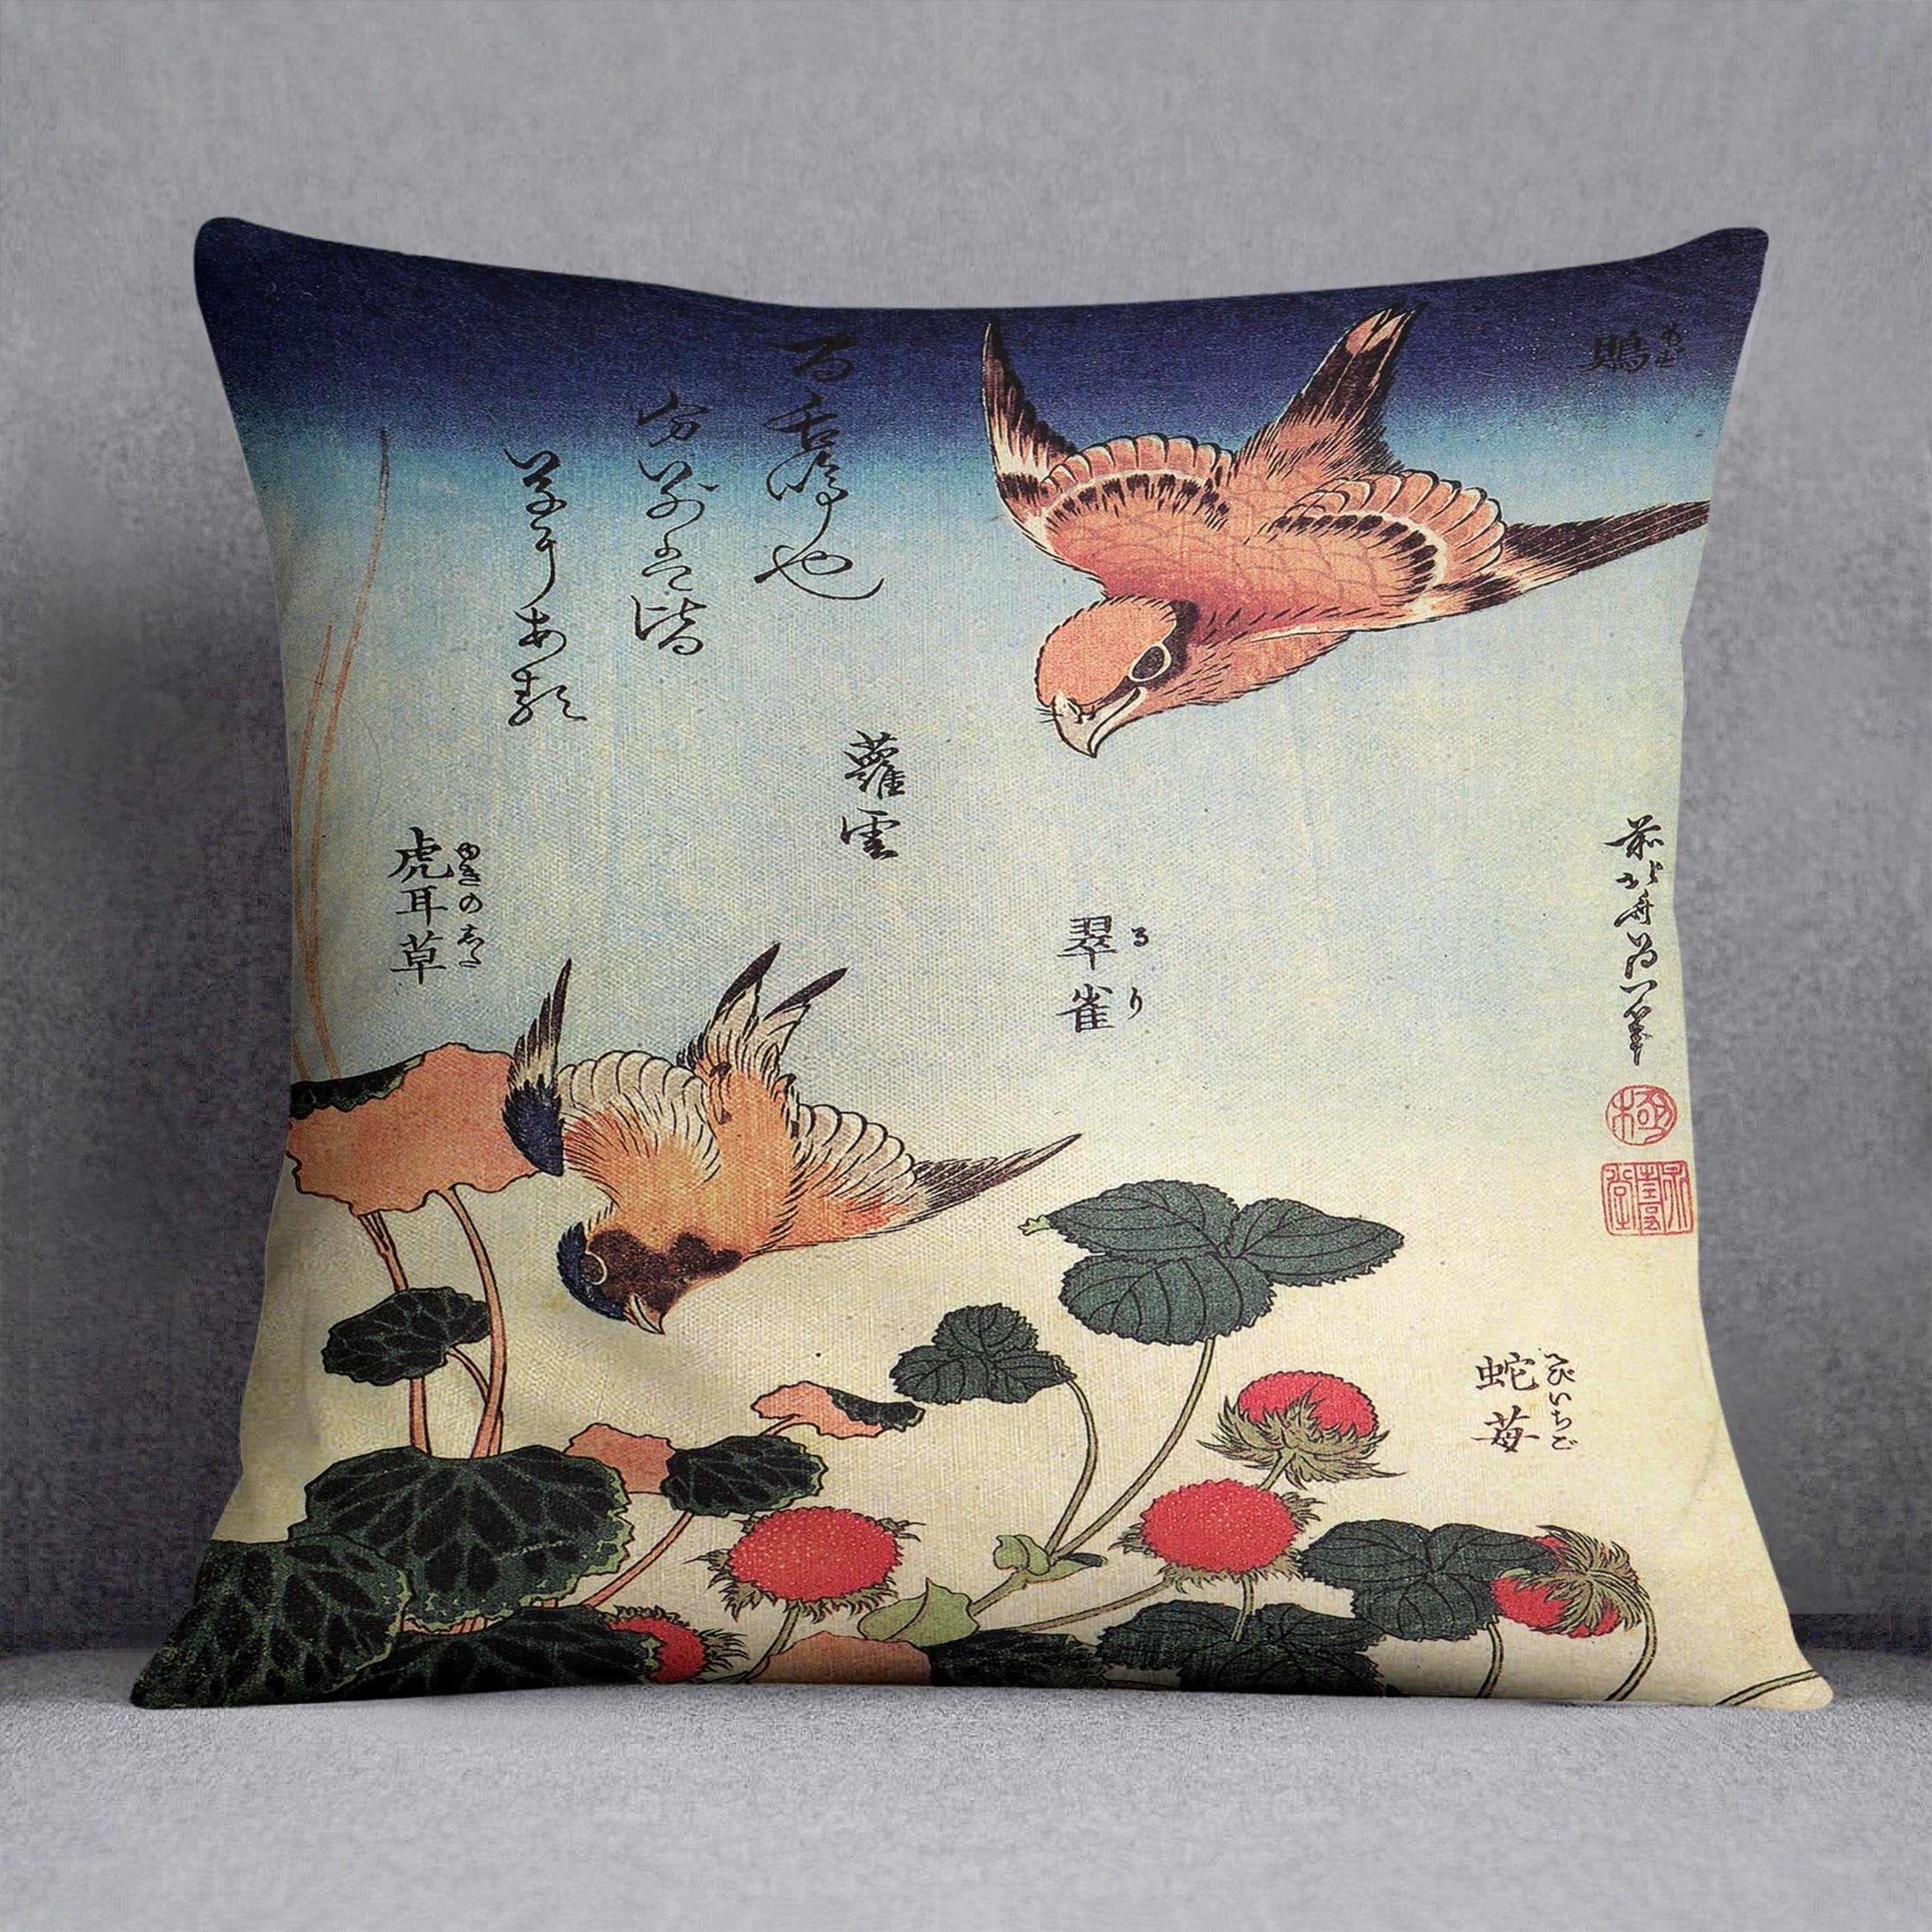 Wild strawberries and birds by Hokusai Throw Pillow